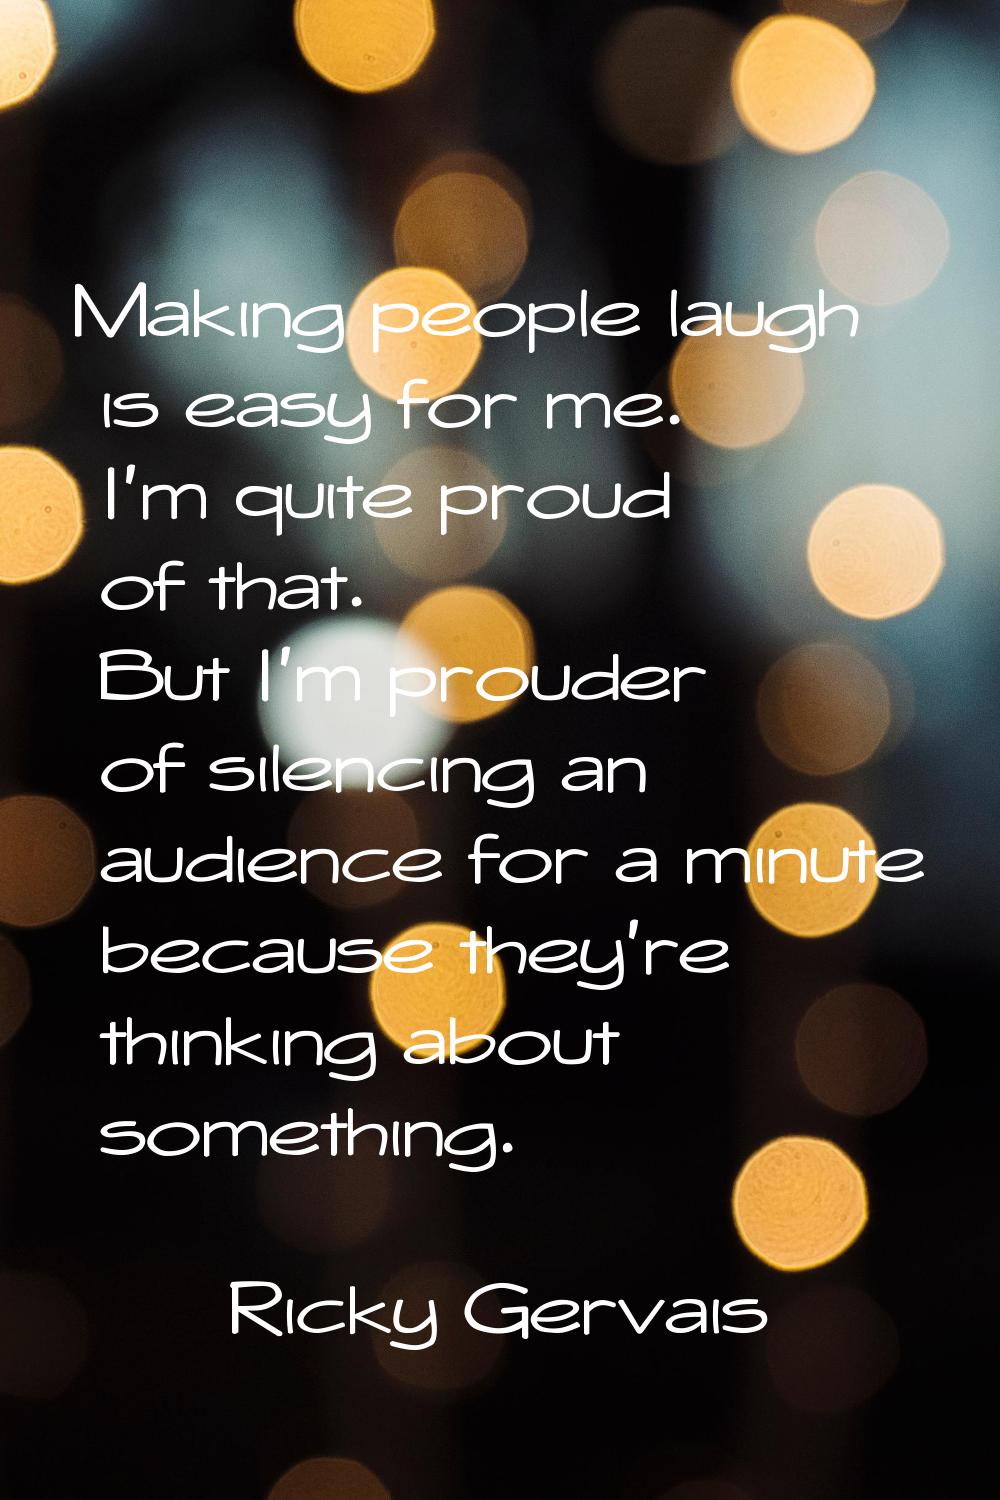 Making people laugh is easy for me. I'm quite proud of that. But I'm prouder of silencing an audien